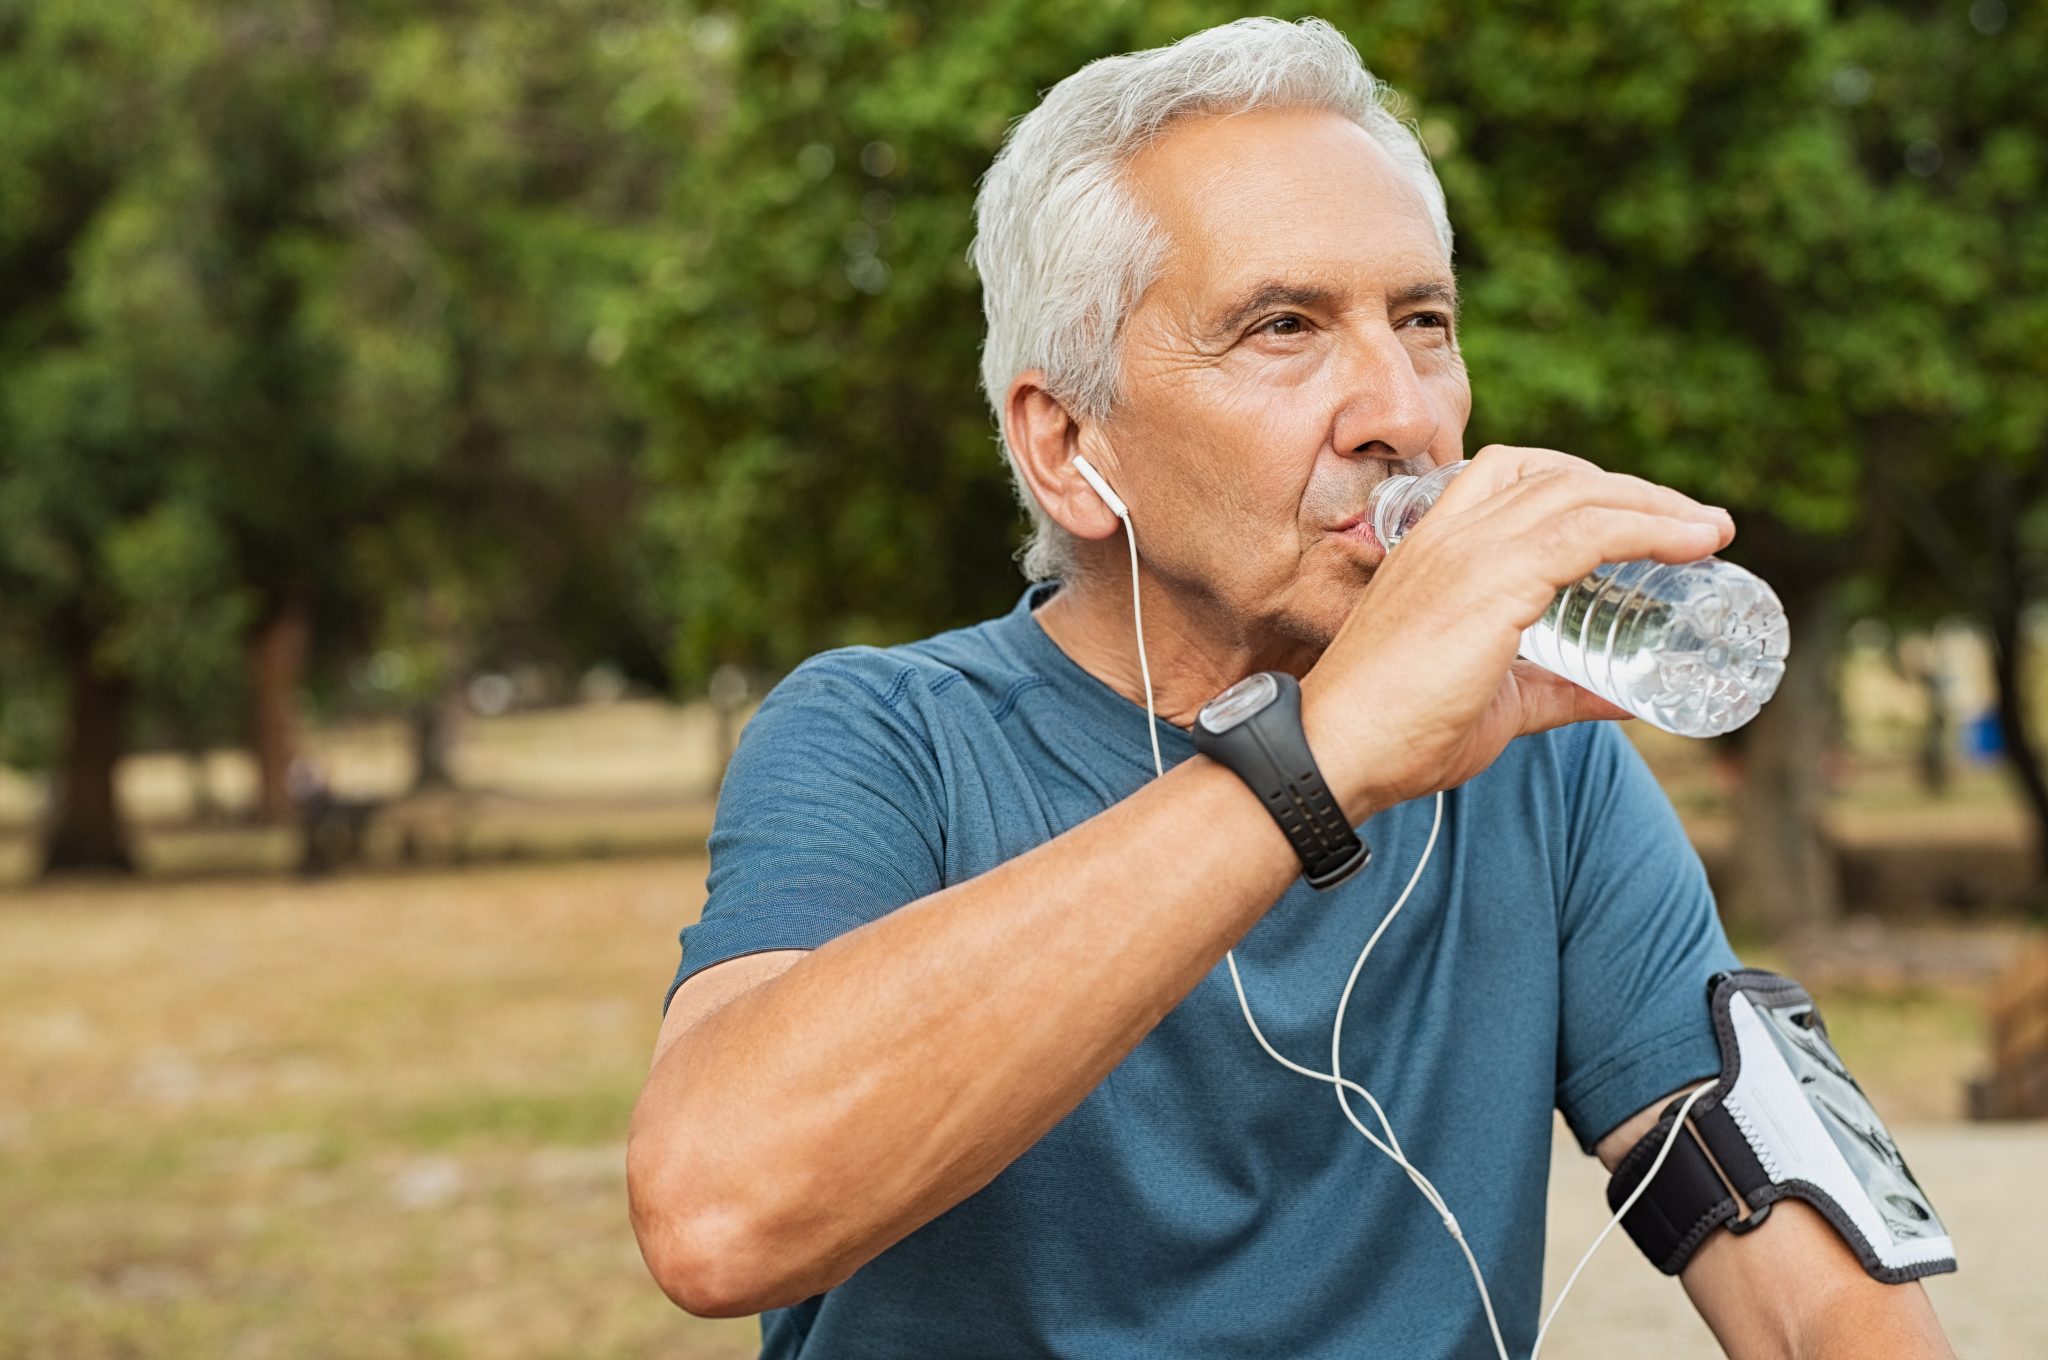 Five ways staying hydrated helps your cardiovascular health.